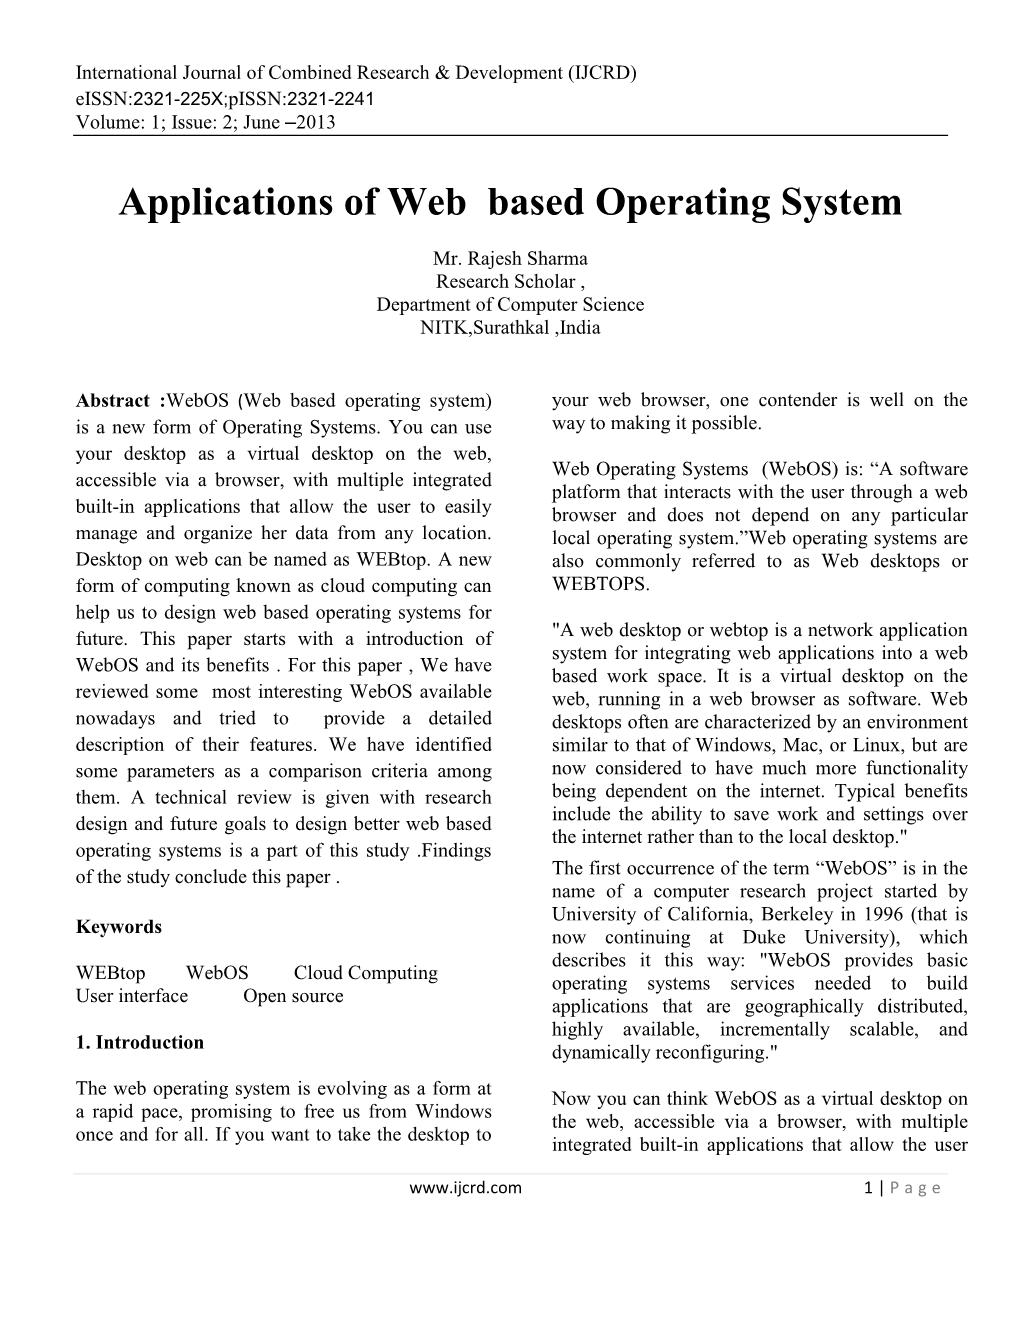 Applications of Web Based Operating System